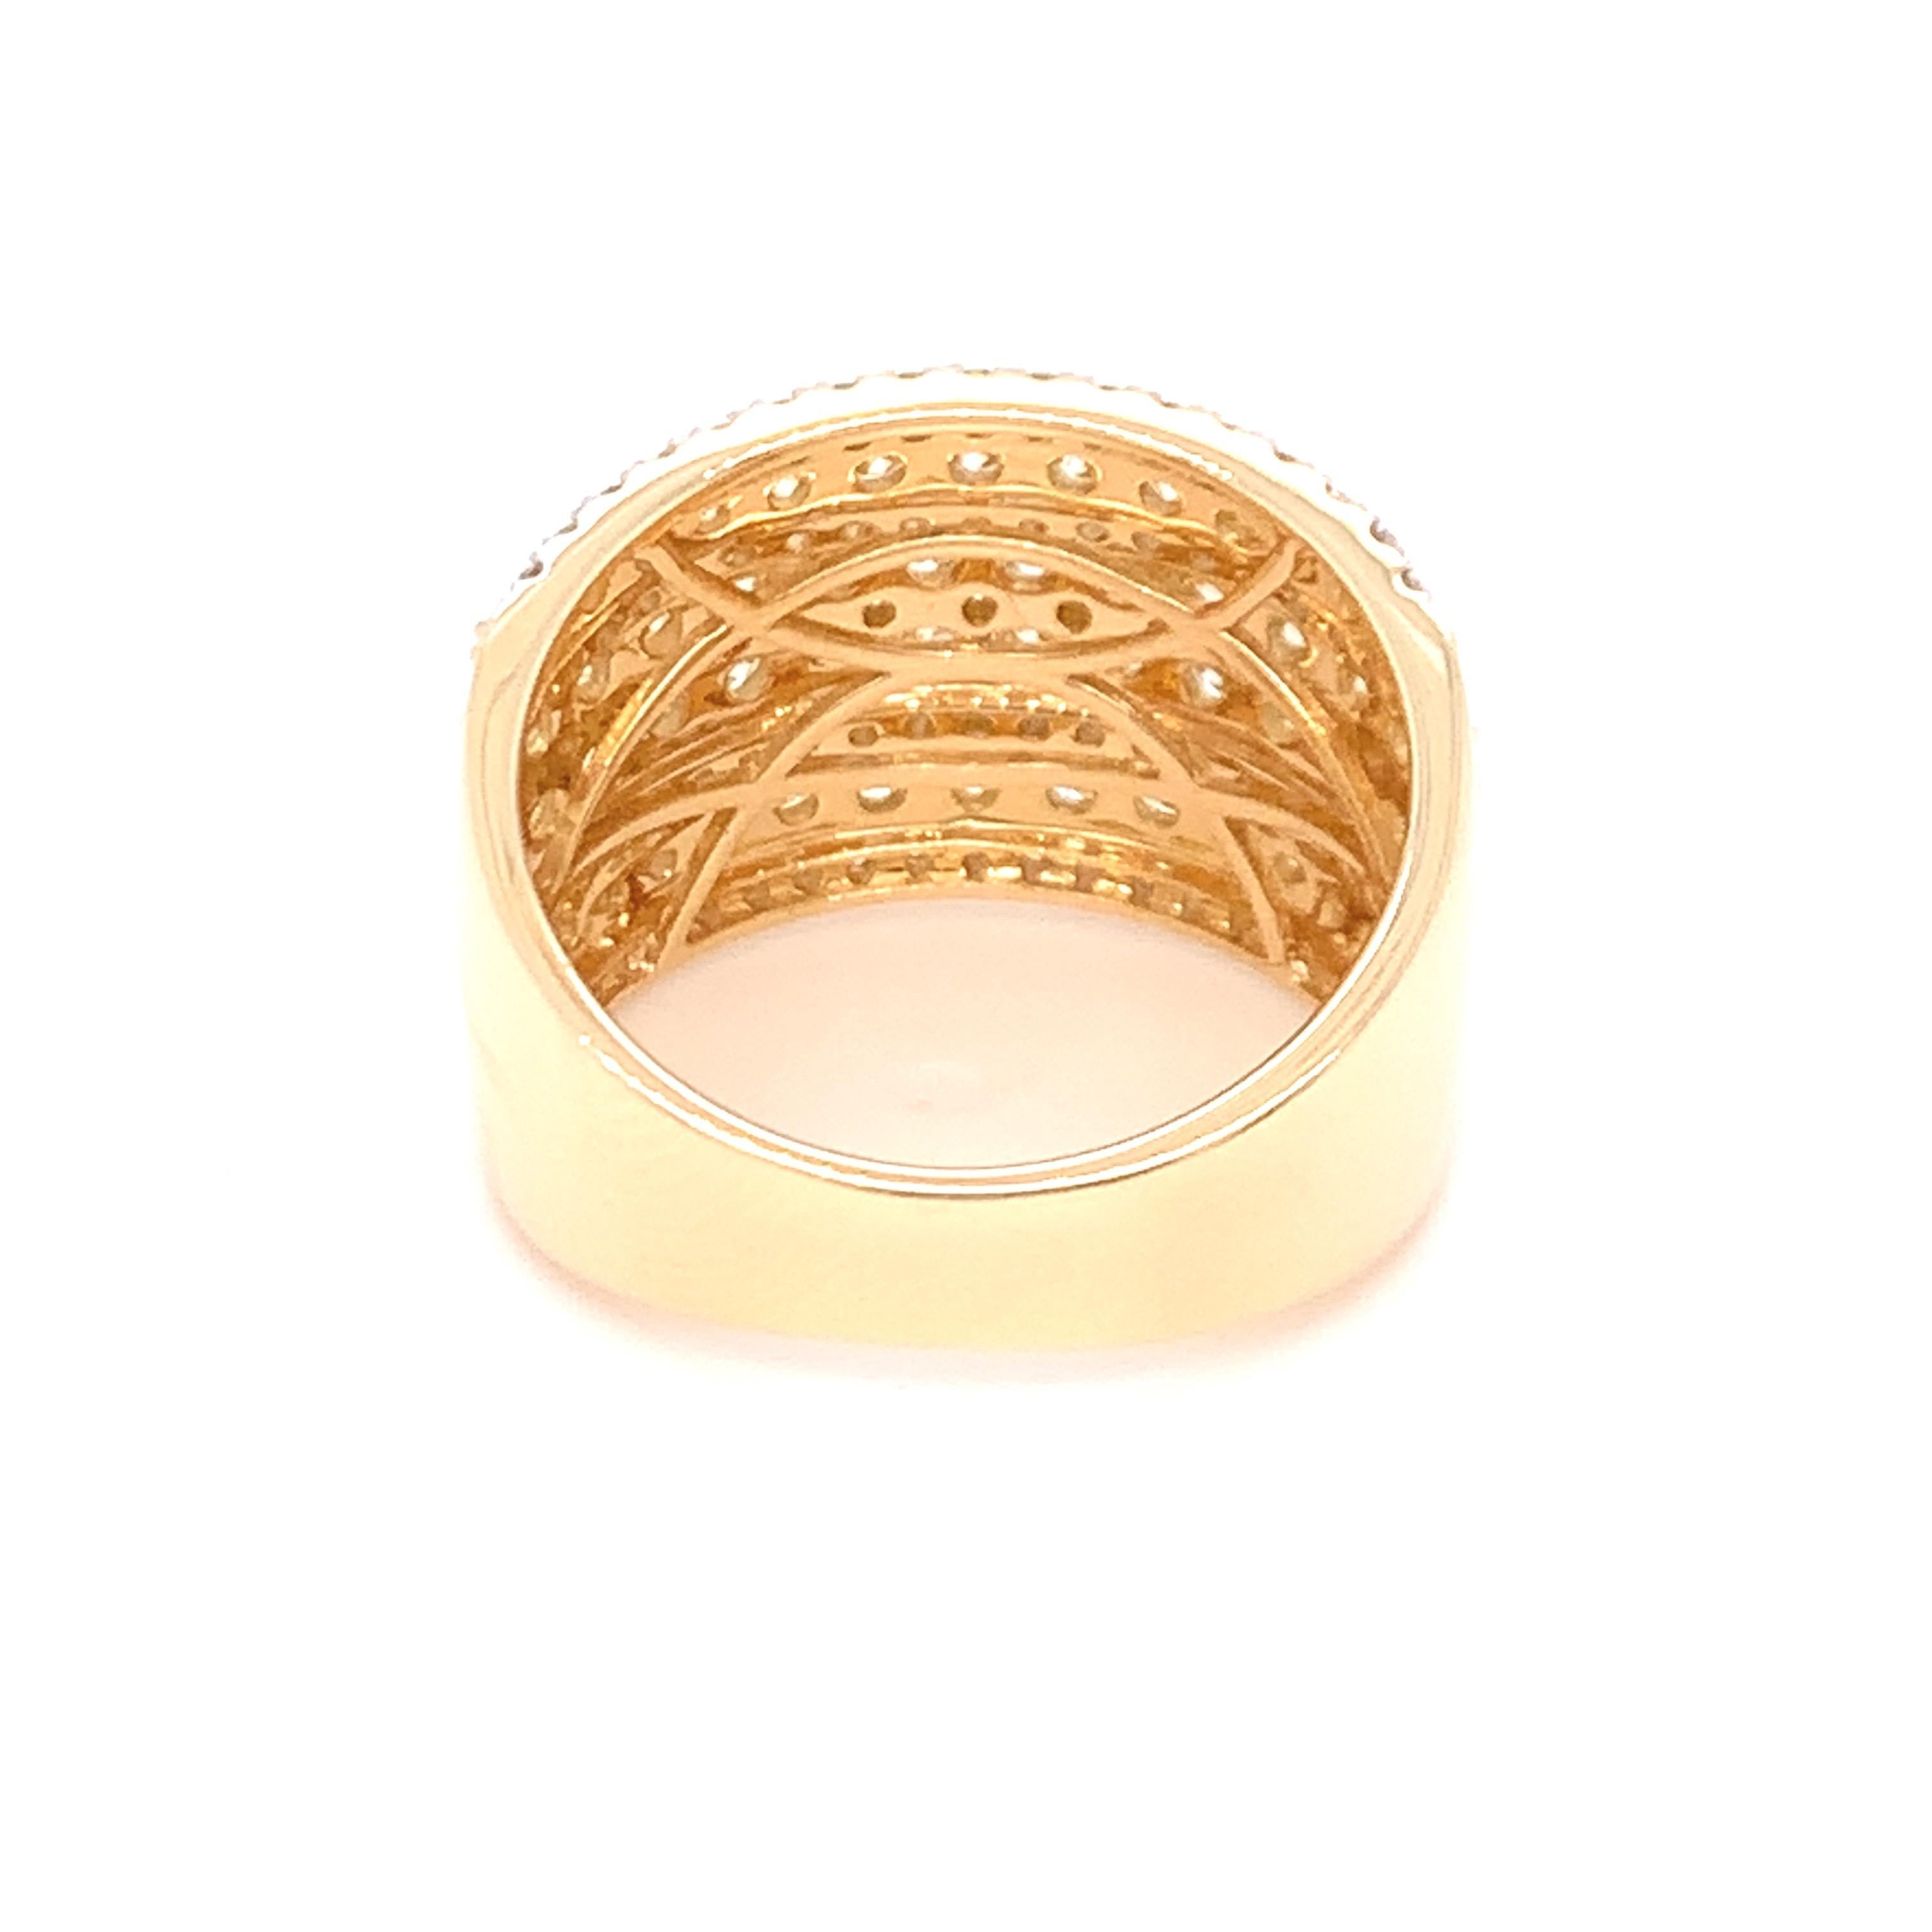 2.08 Carat Diamond Band Ring in 14k Yellow Gold For Sale 2